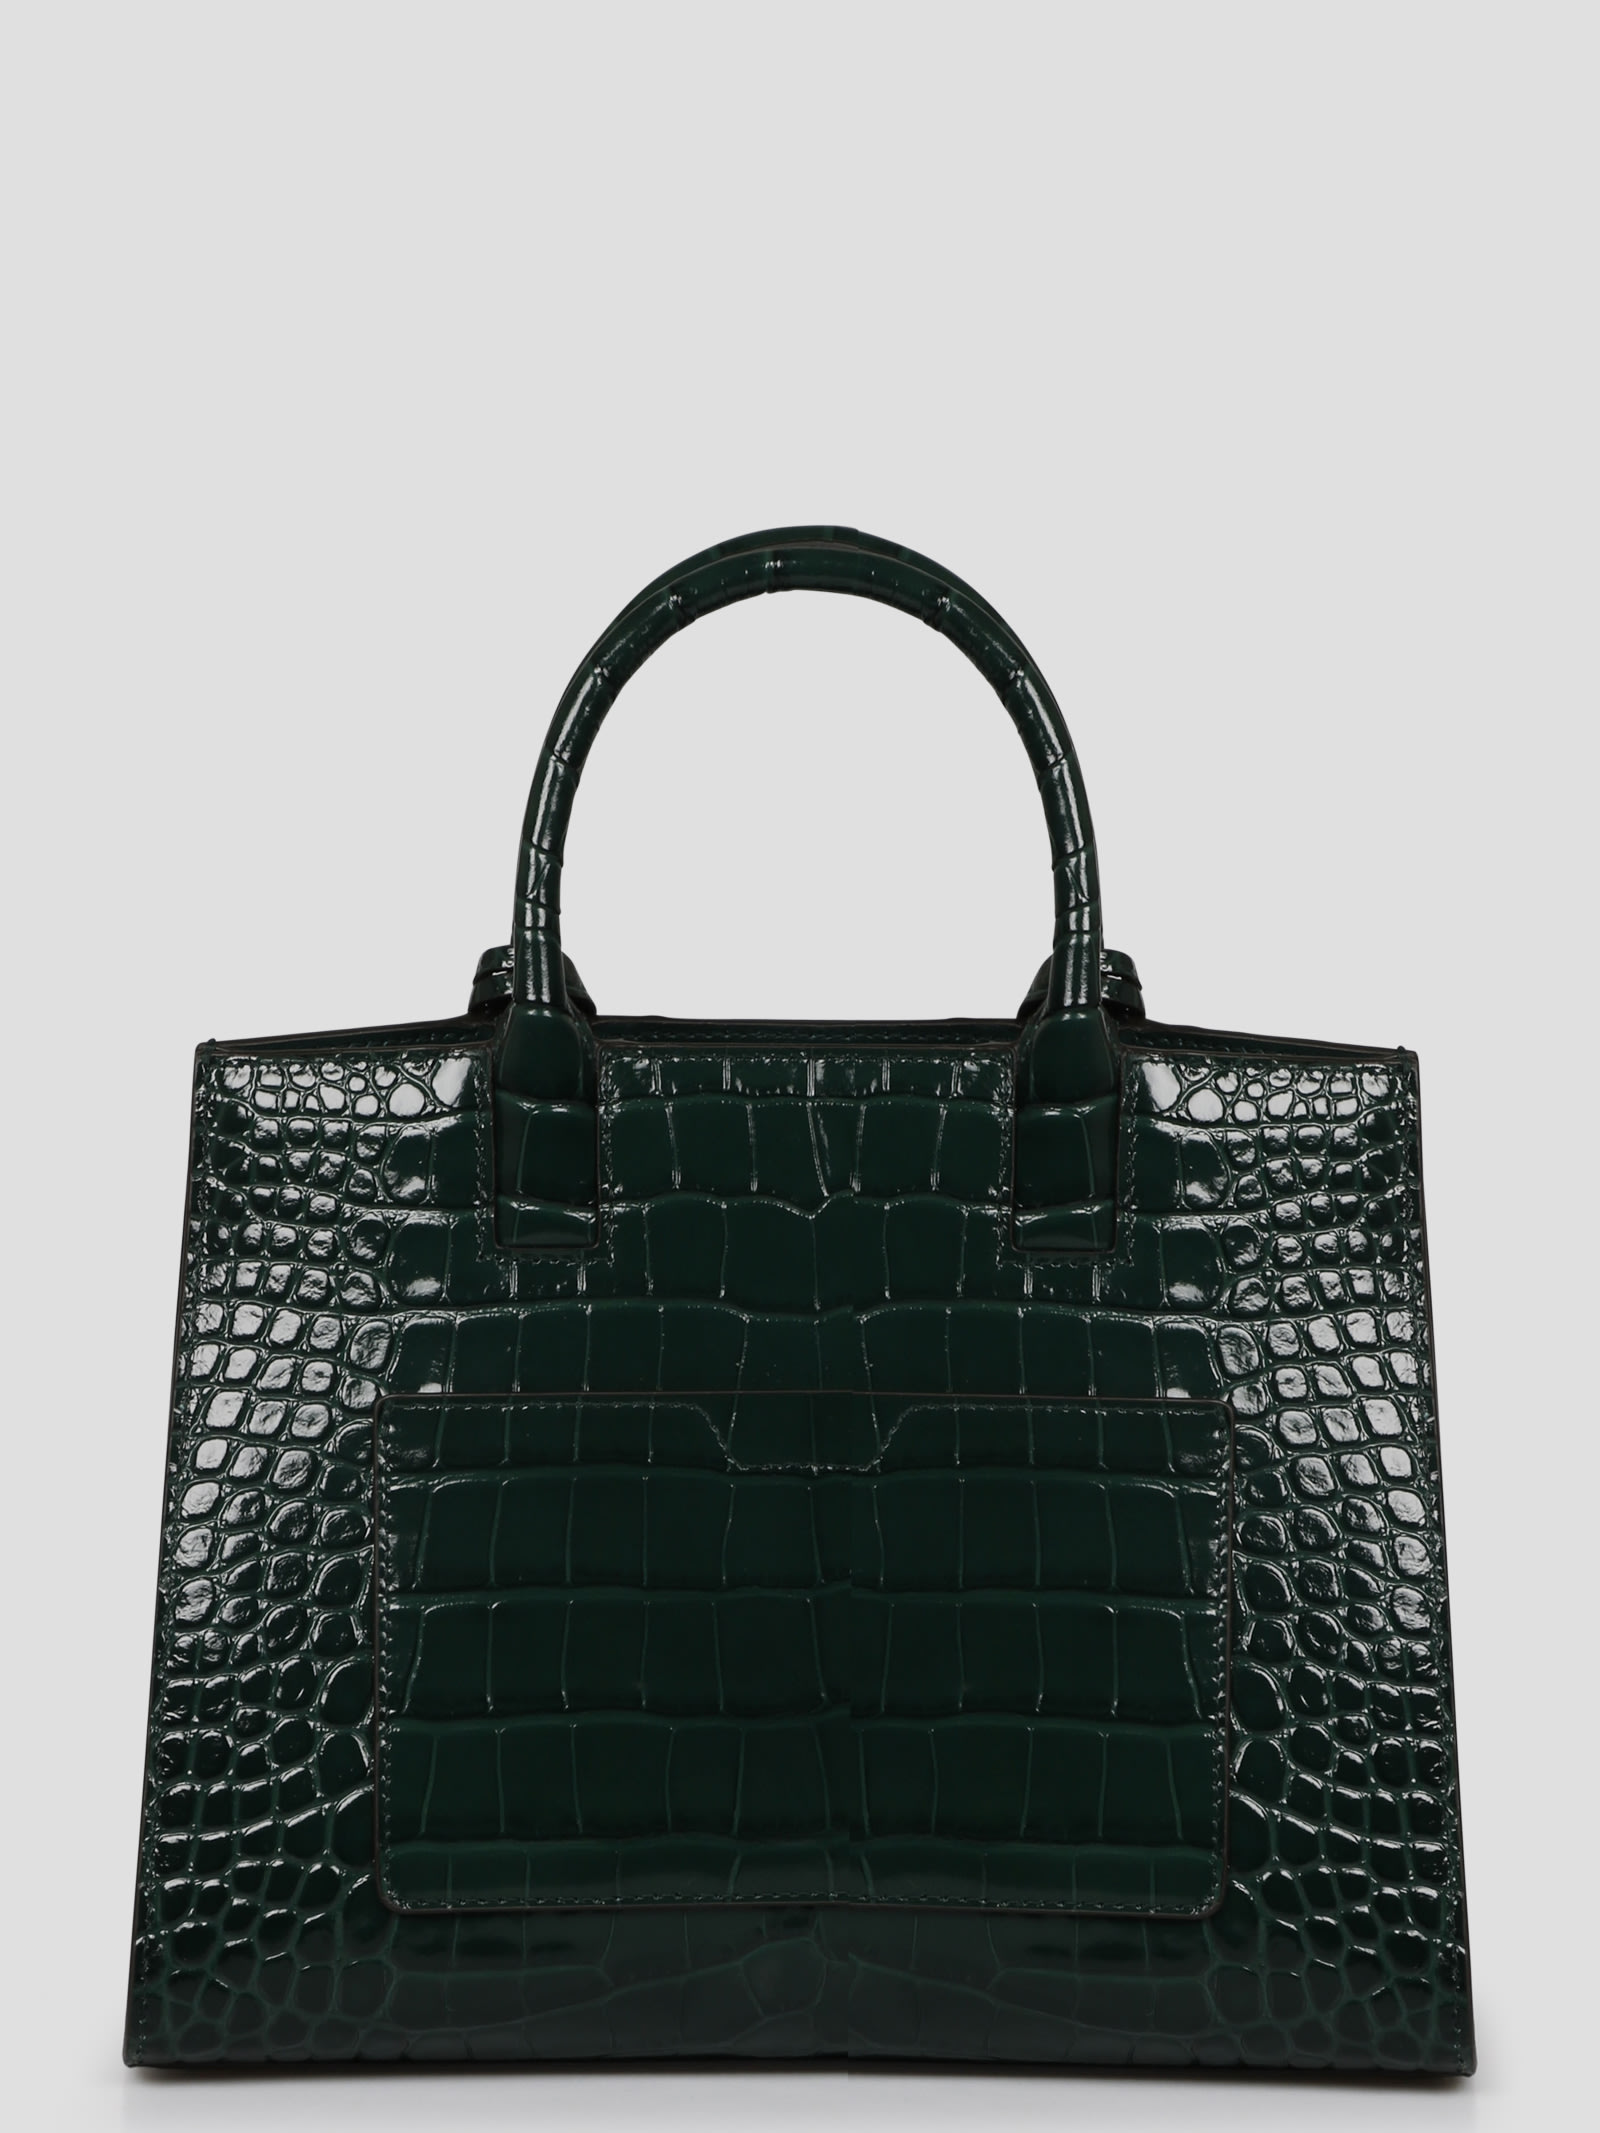 Burberry Frances Croc Embossed Leather Top Handle Bag